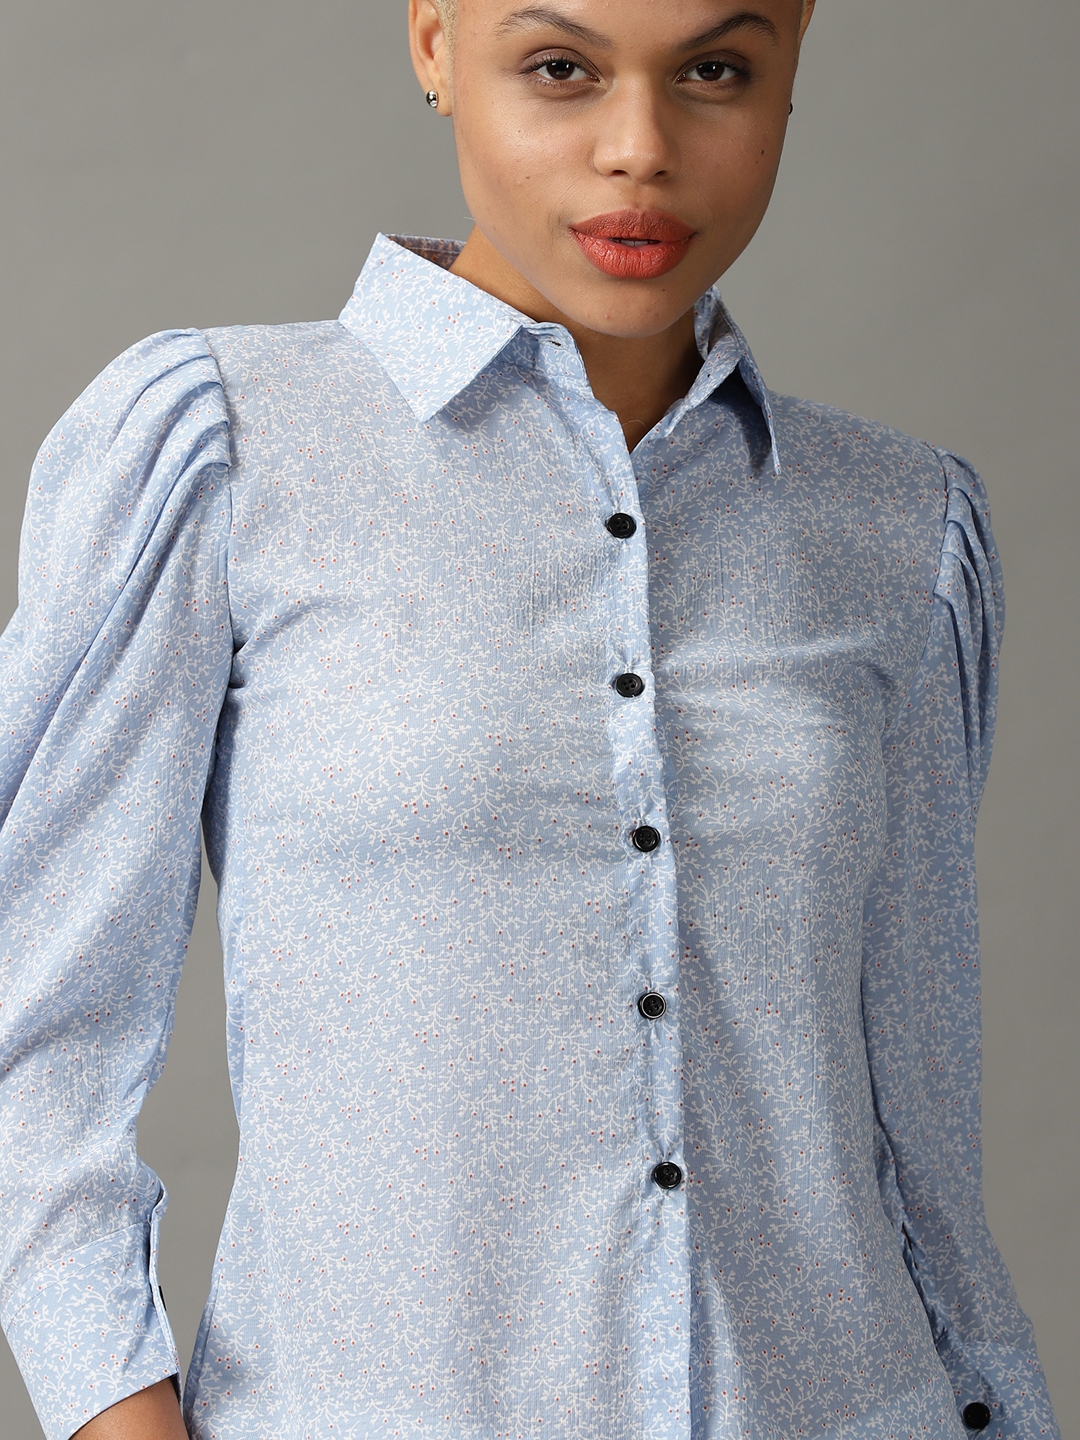 Women's Blue Georgette Printed Casual Shirts